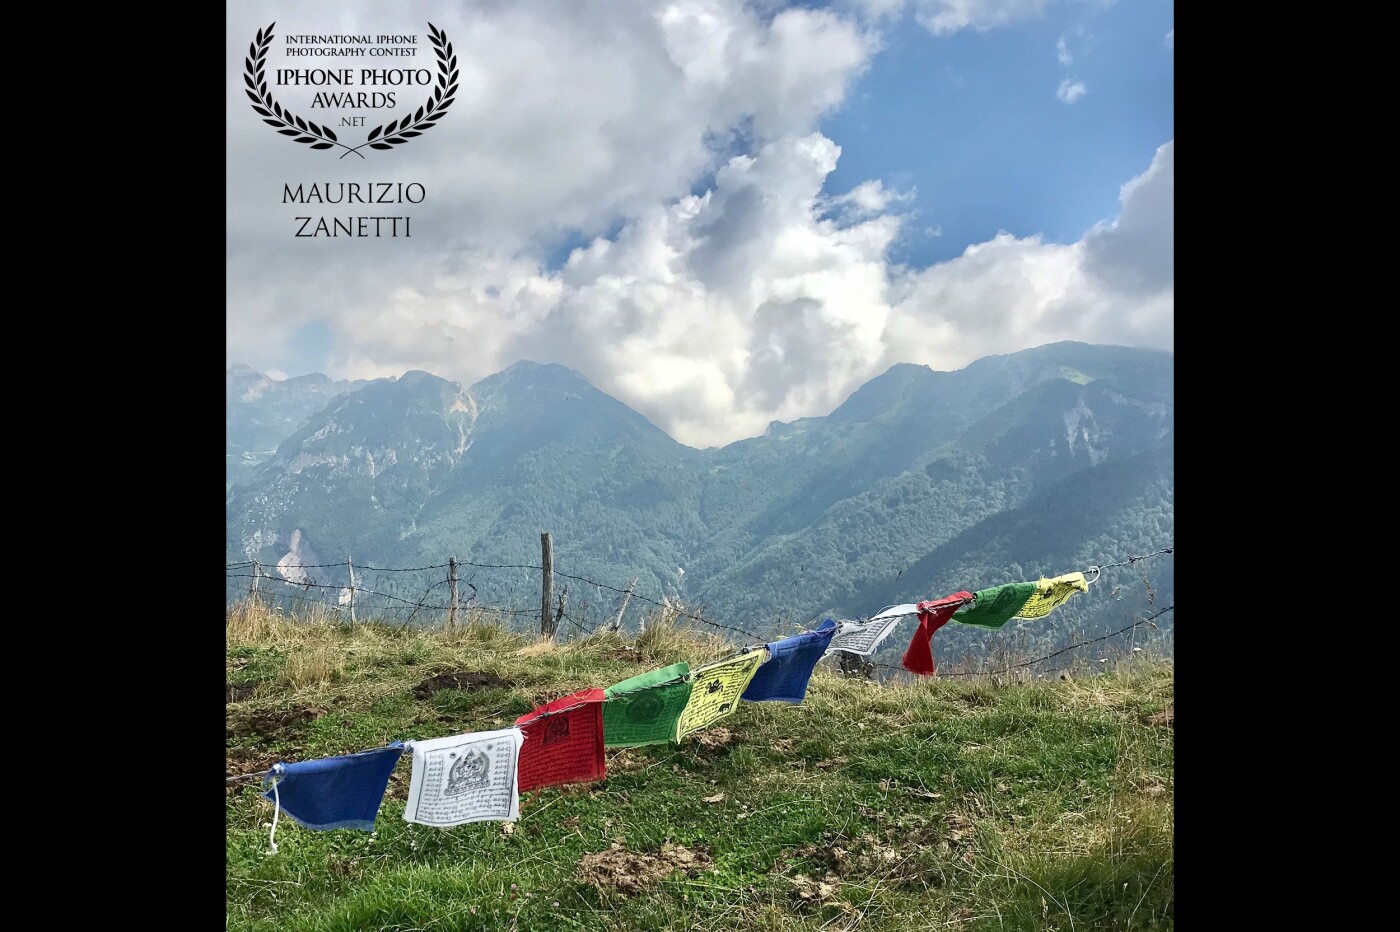 An hour's drive from Verona, on the Lessinia plateau, a path runs alongside a cliff for a few kilometers. They are the "crests of Mount Grolla", a masterpiece of nature in which it is easy to find chamois and marmots. And also the "lung-ta", the Tibetan prayer flags, spread in the wind by some hikers.